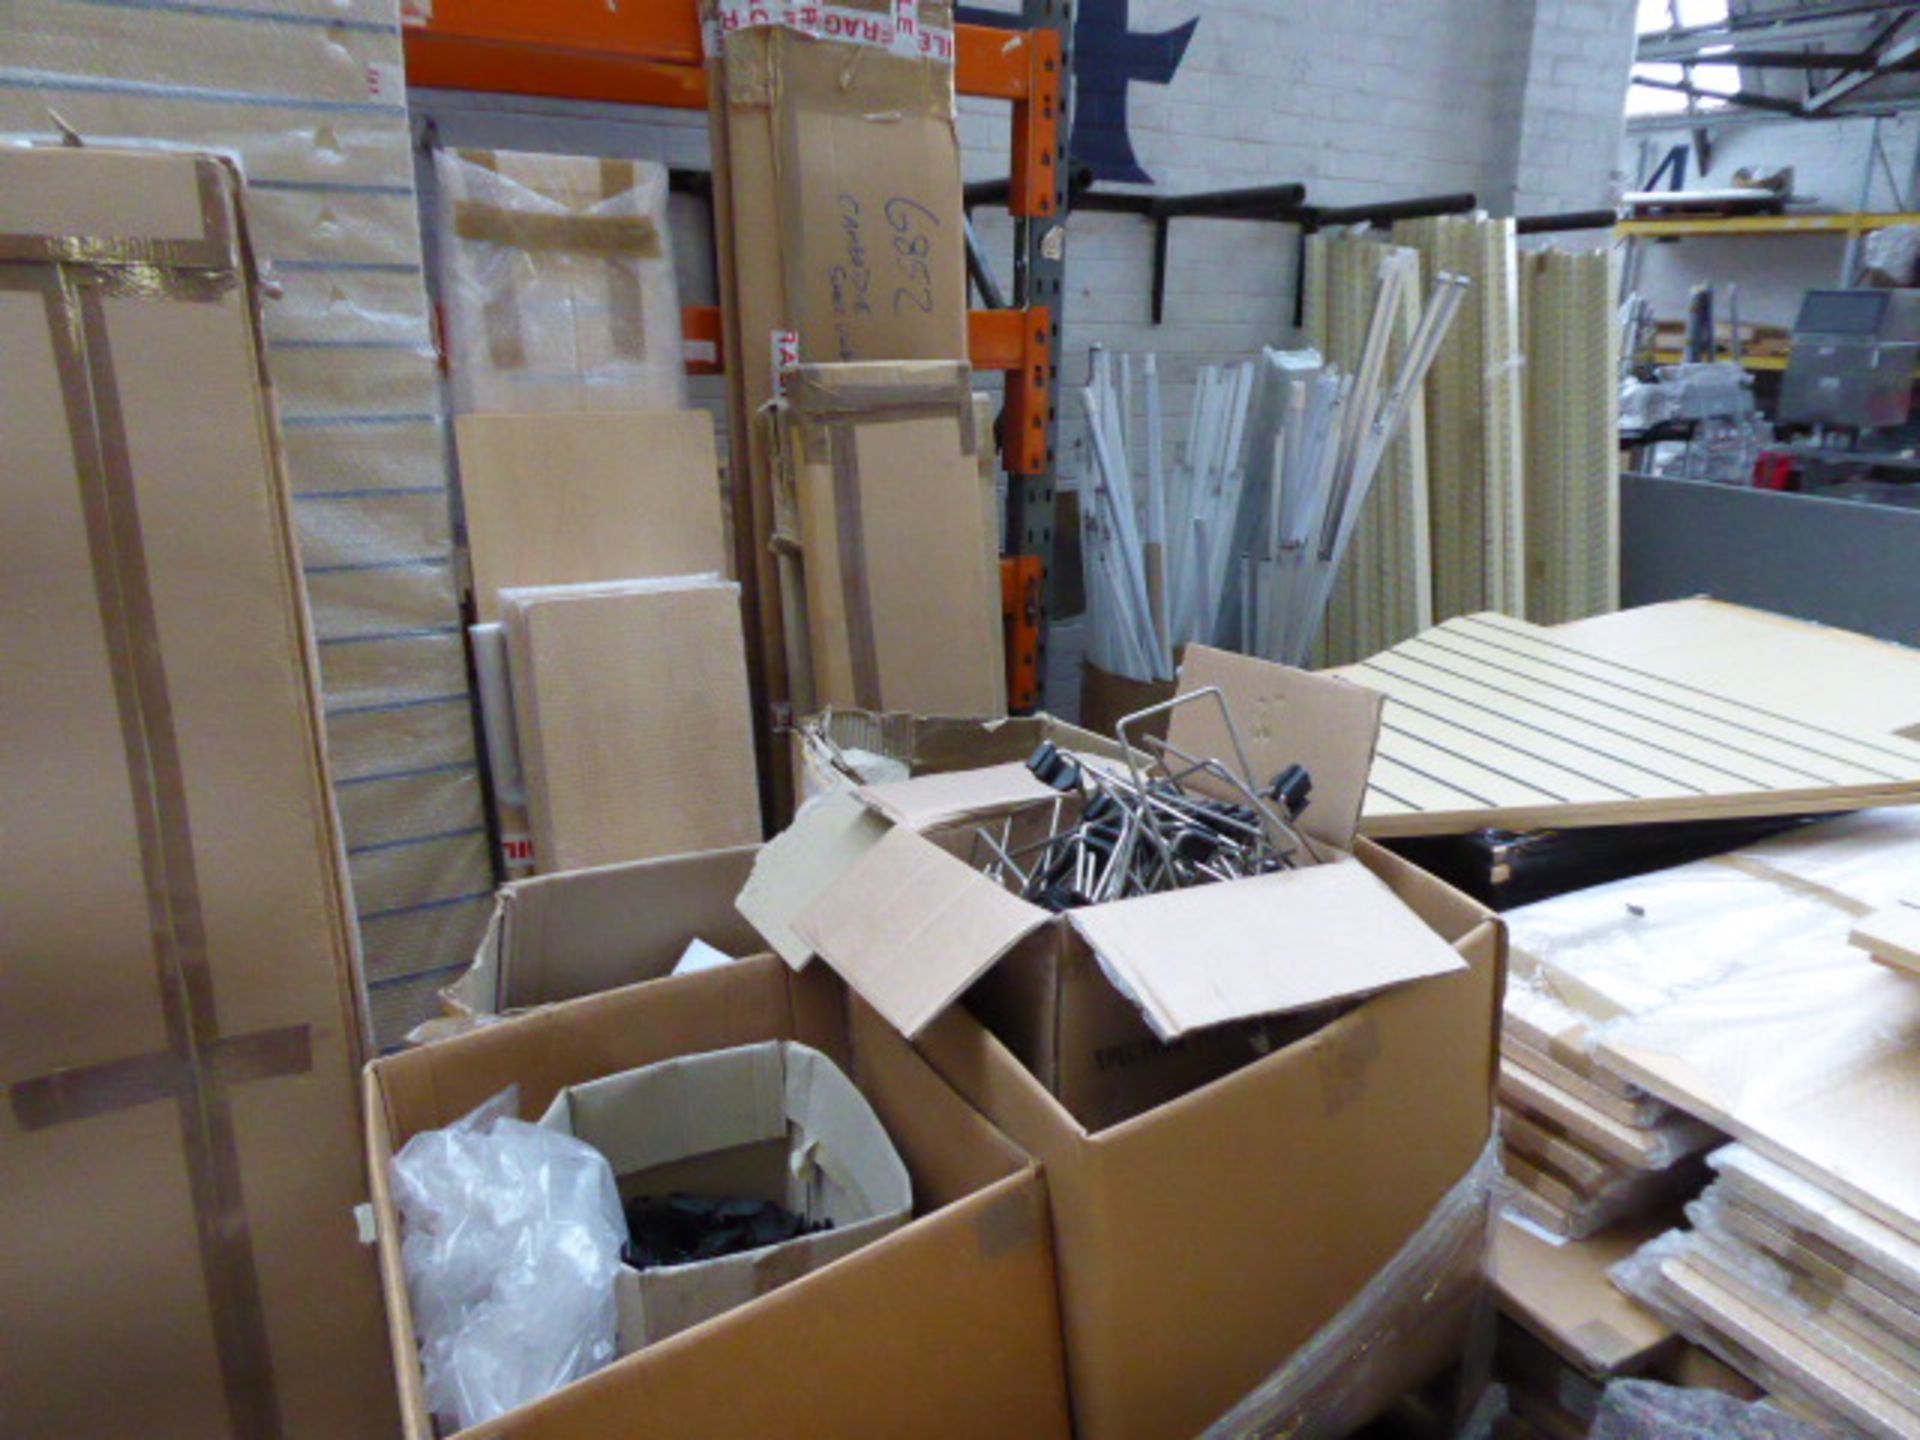 Large quantity of maple library style shelving and component parts. Includes approx. 6 pallets and a